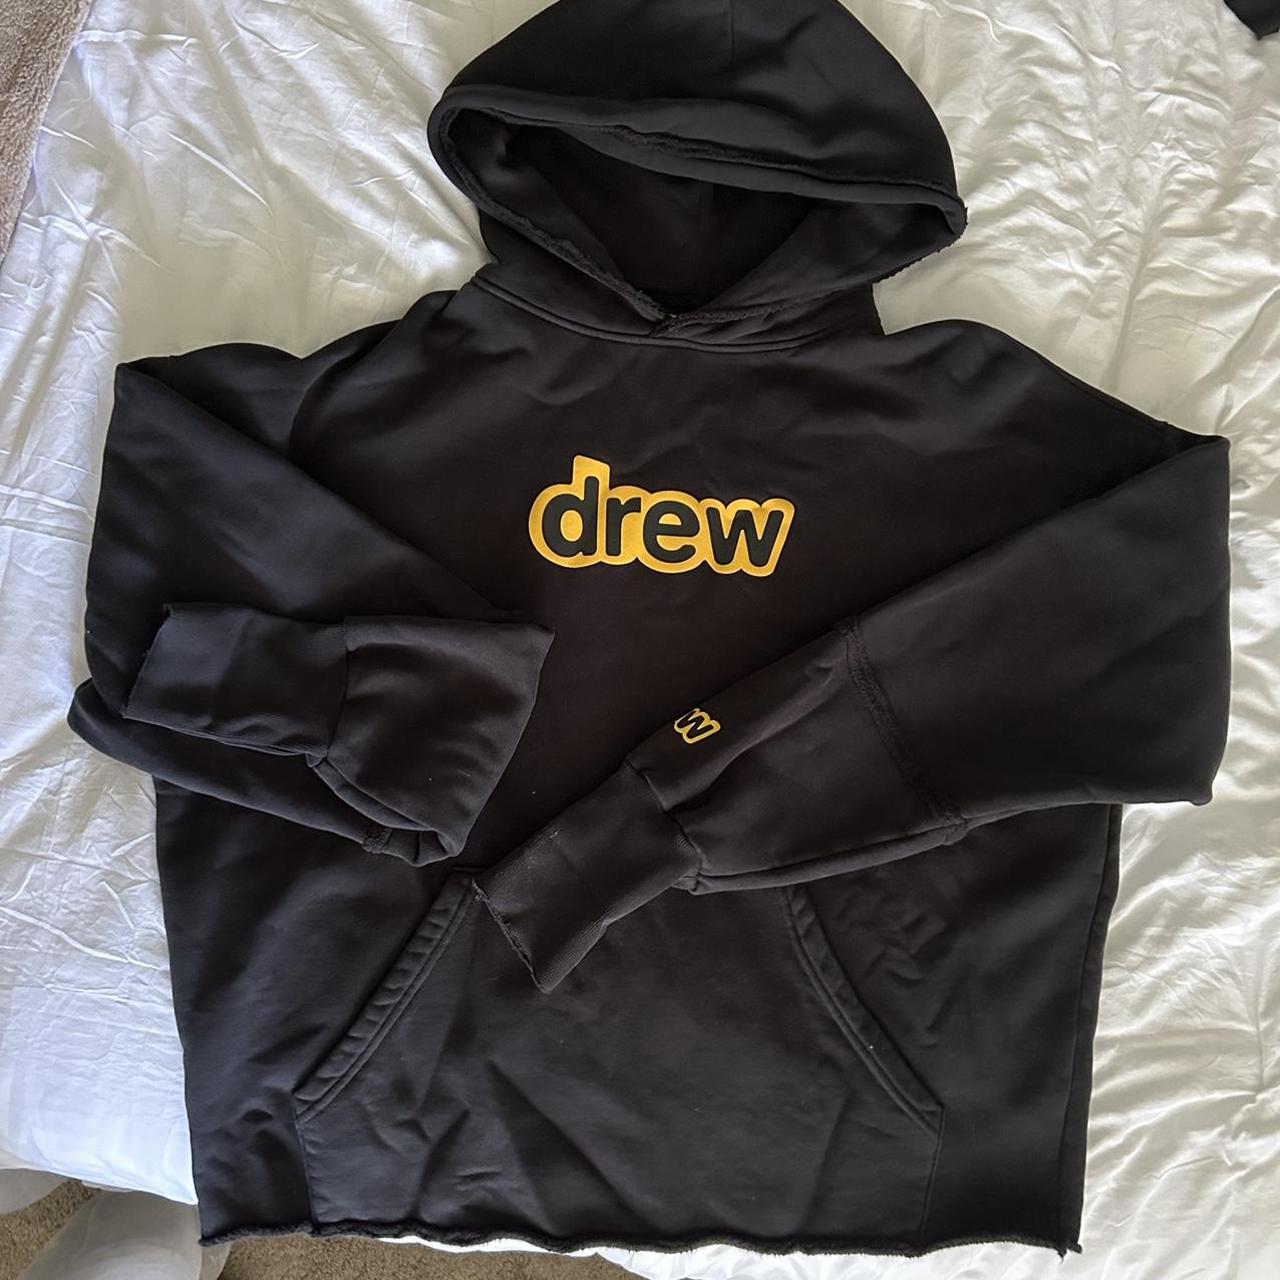 Drew House Hoodie! Bought from the official website...